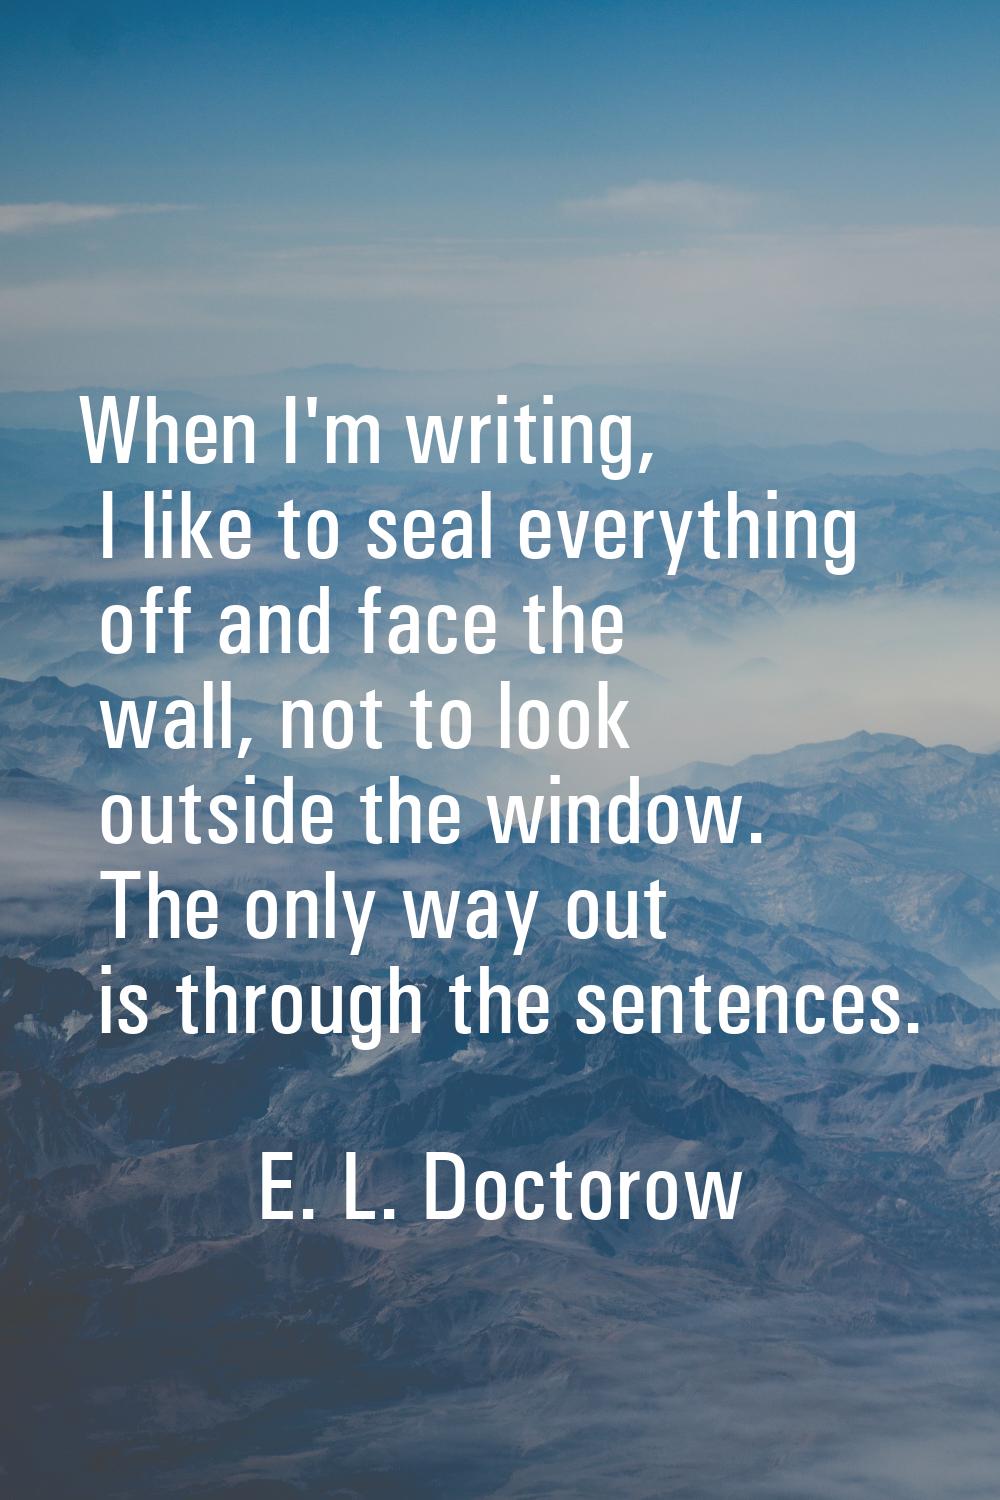 When I'm writing, I like to seal everything off and face the wall, not to look outside the window. 